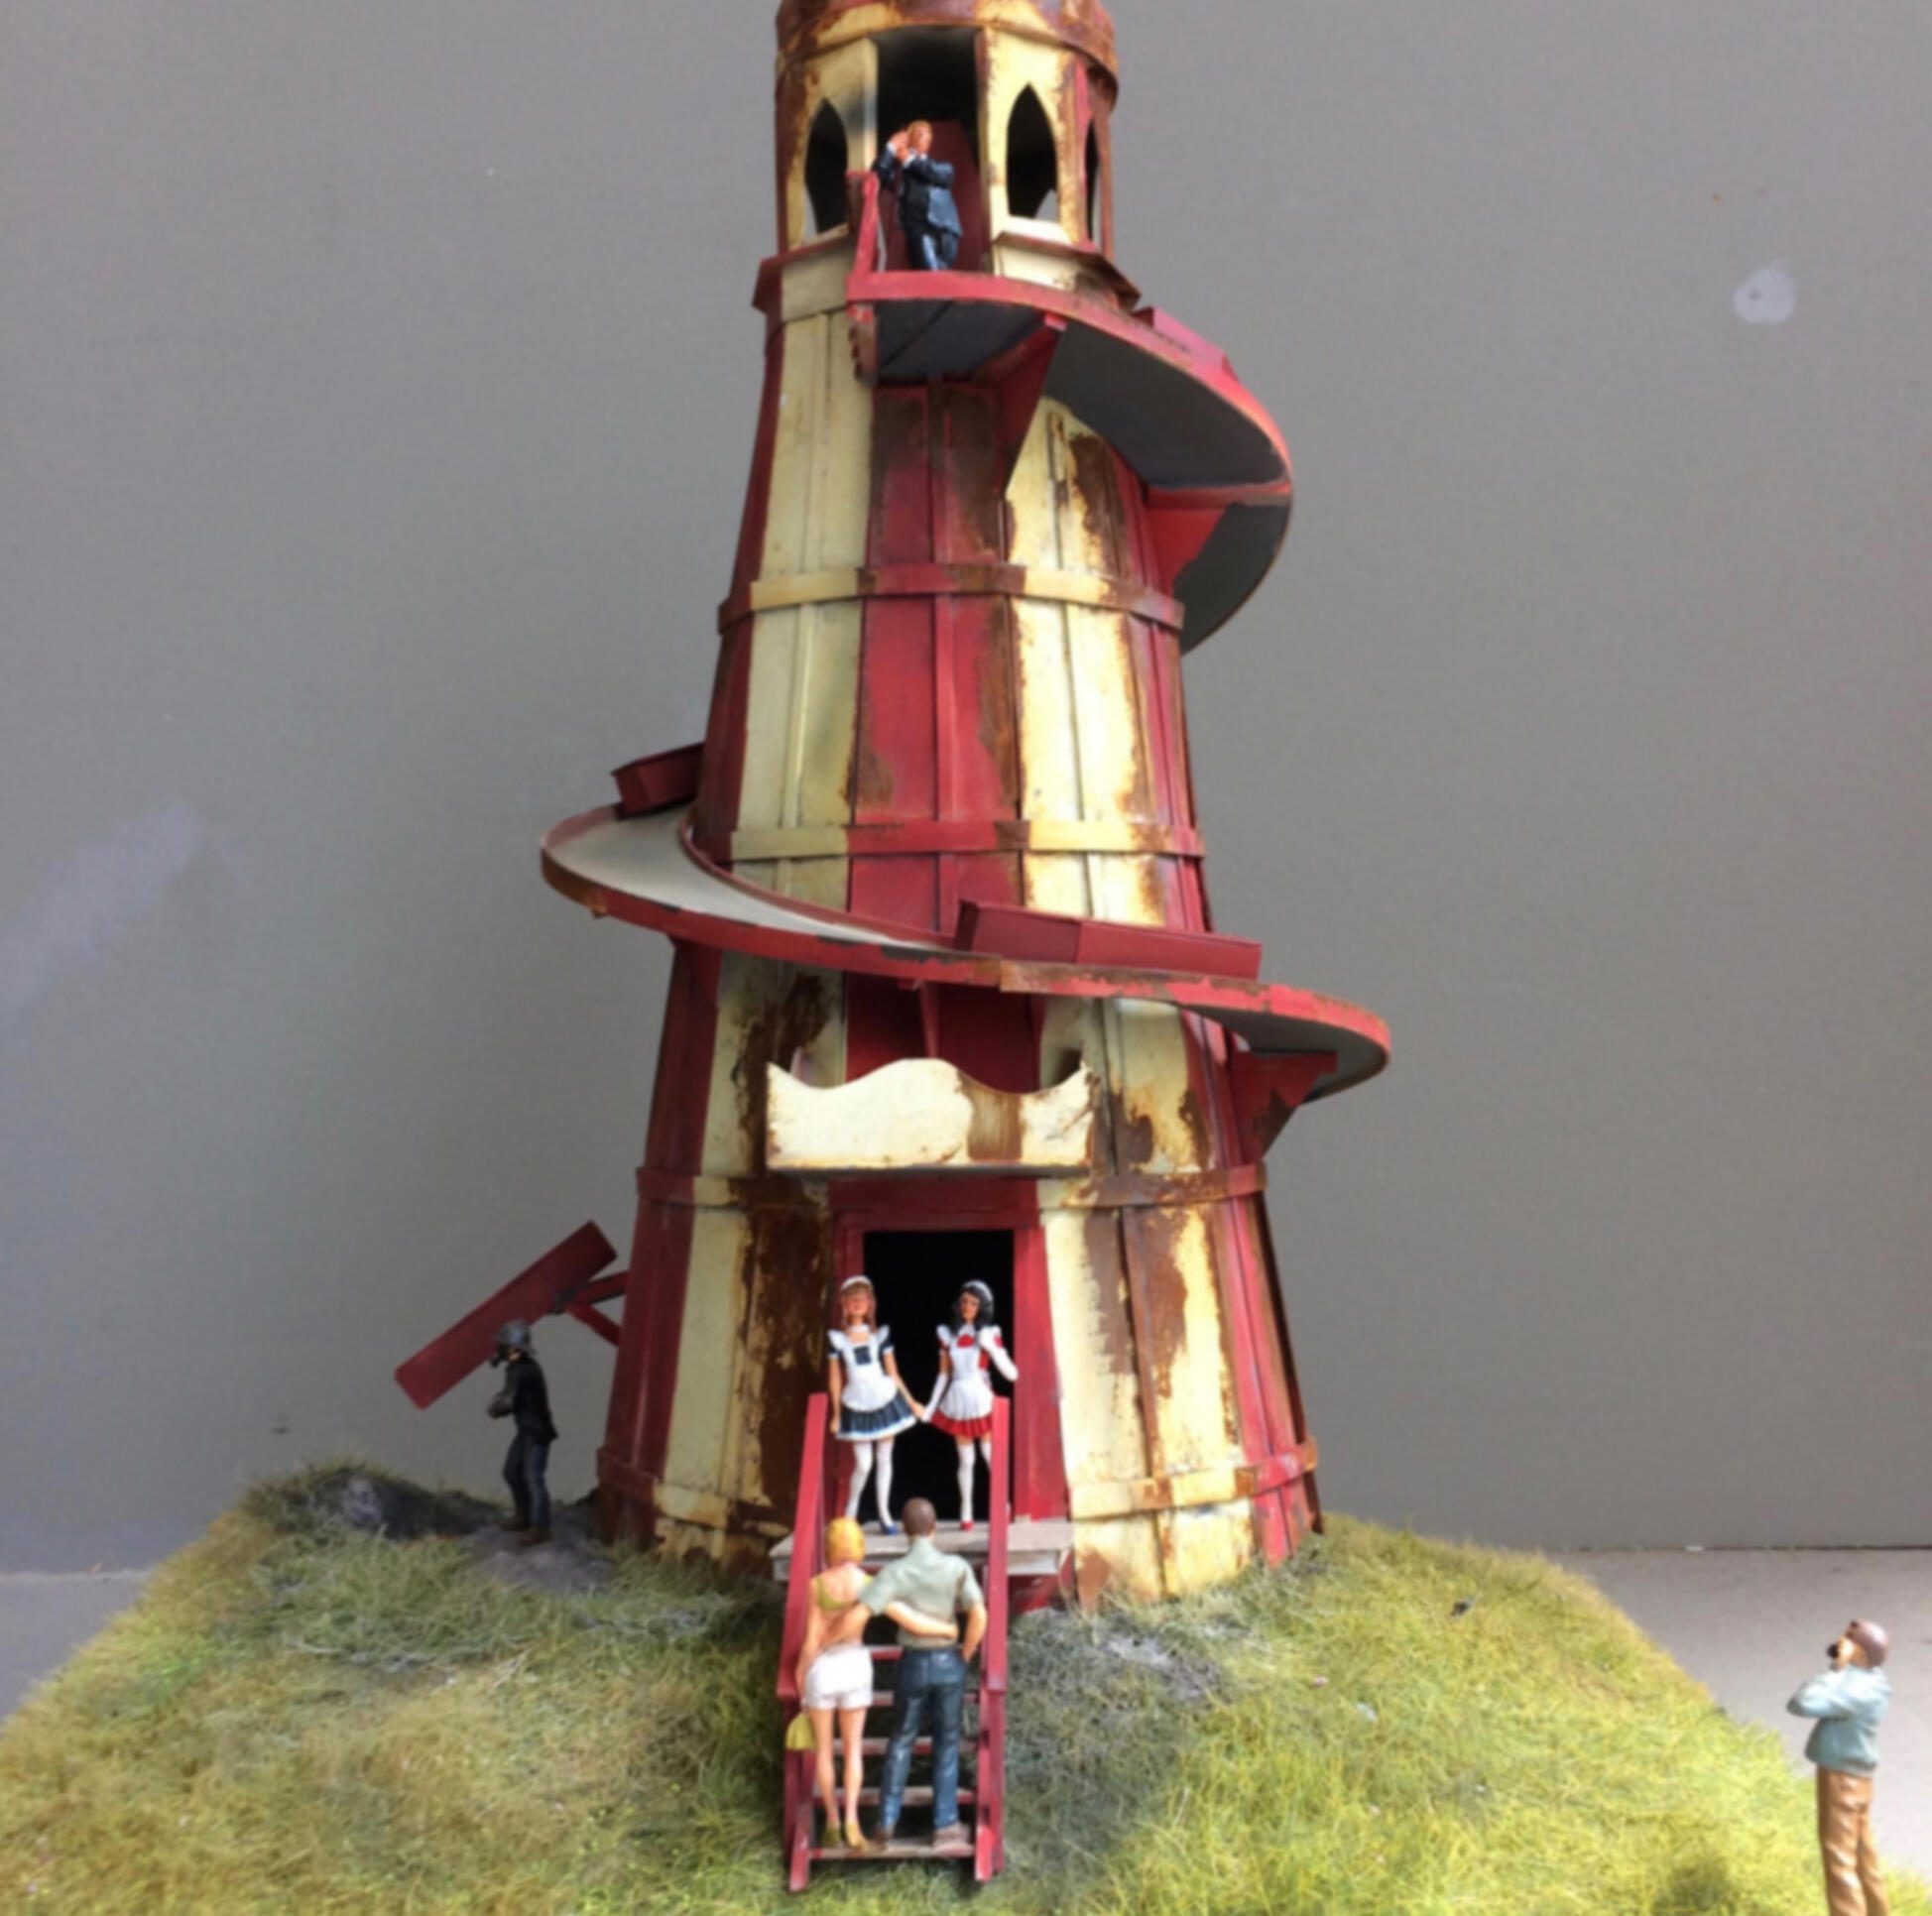 Miniature of a light tower with a winding road around it and several small miniatures of people in and around it. ; Howard Quednau